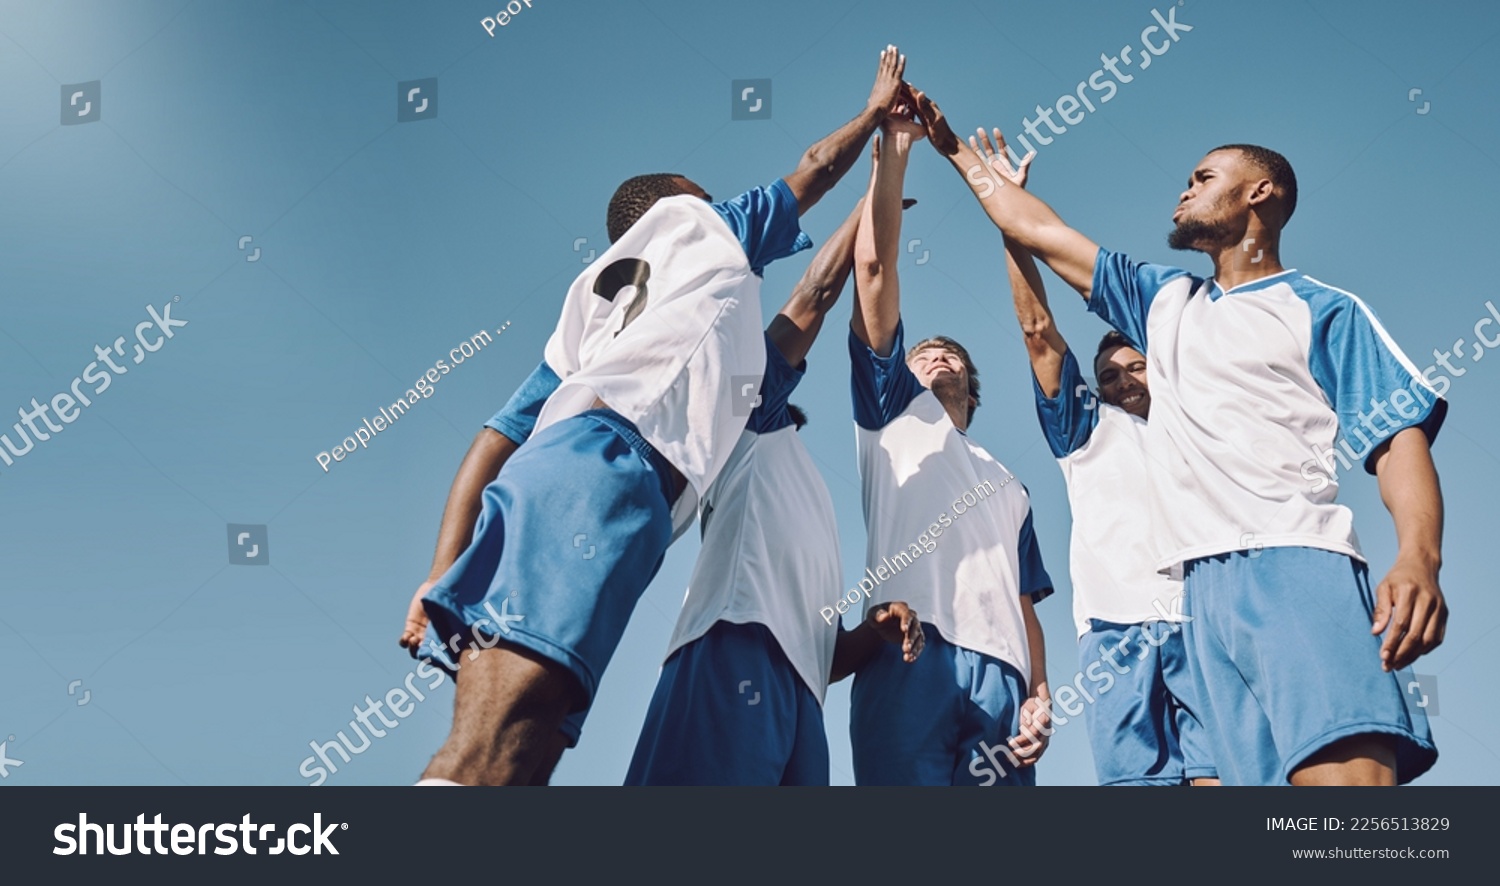 Soccer, team high five and men celebrate winning at sports competition or game with teamwork on field. Football champion group with motivation hands for a goal, performance and fitness achievement #2256513829